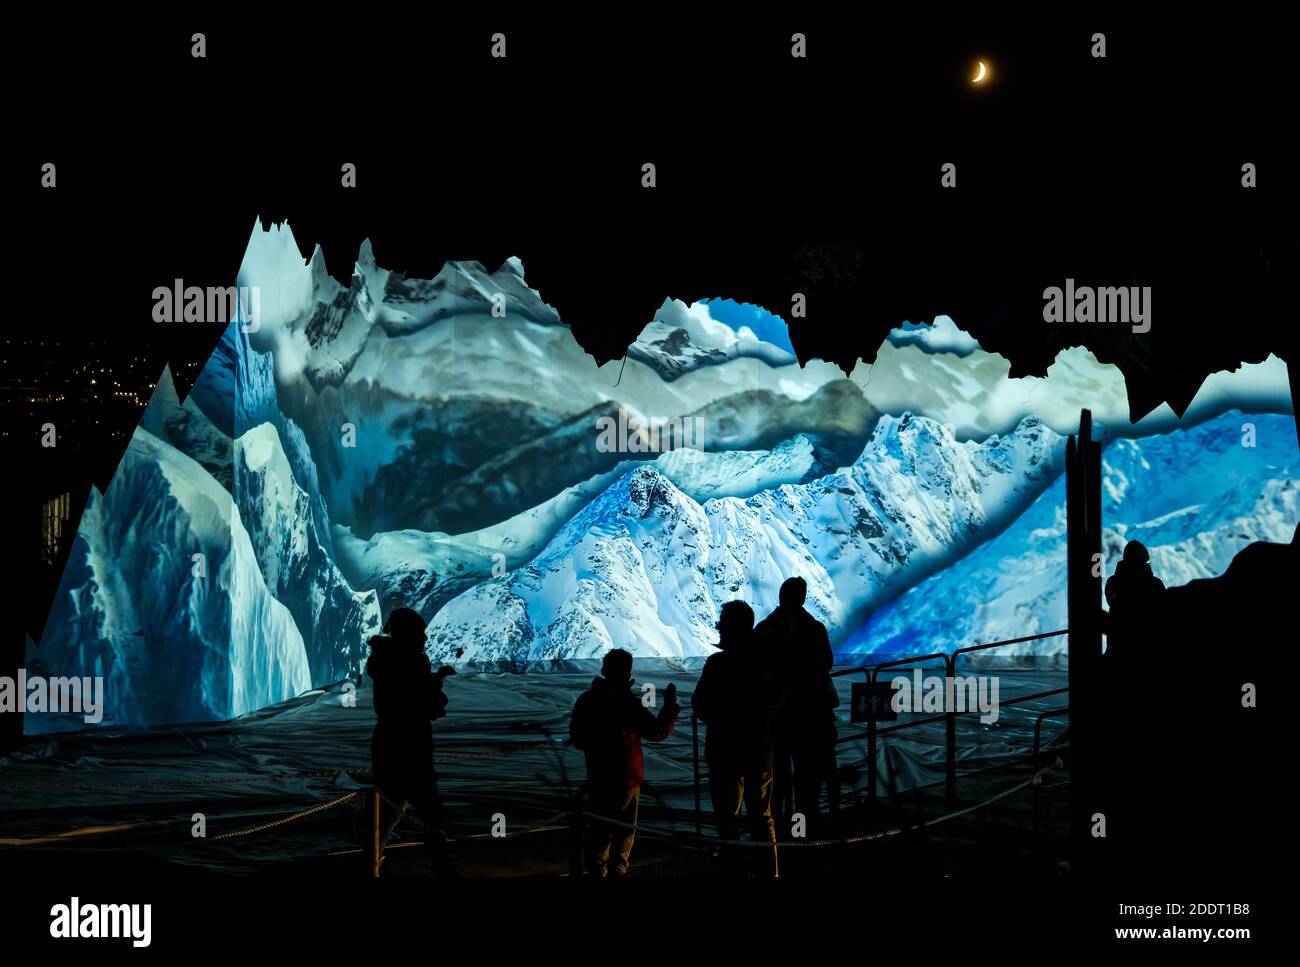 Silhouettes of people watching Winter mountain landscape projection with crescent moon, Edinburgh Zoo, Scotland, UK Stock Photo